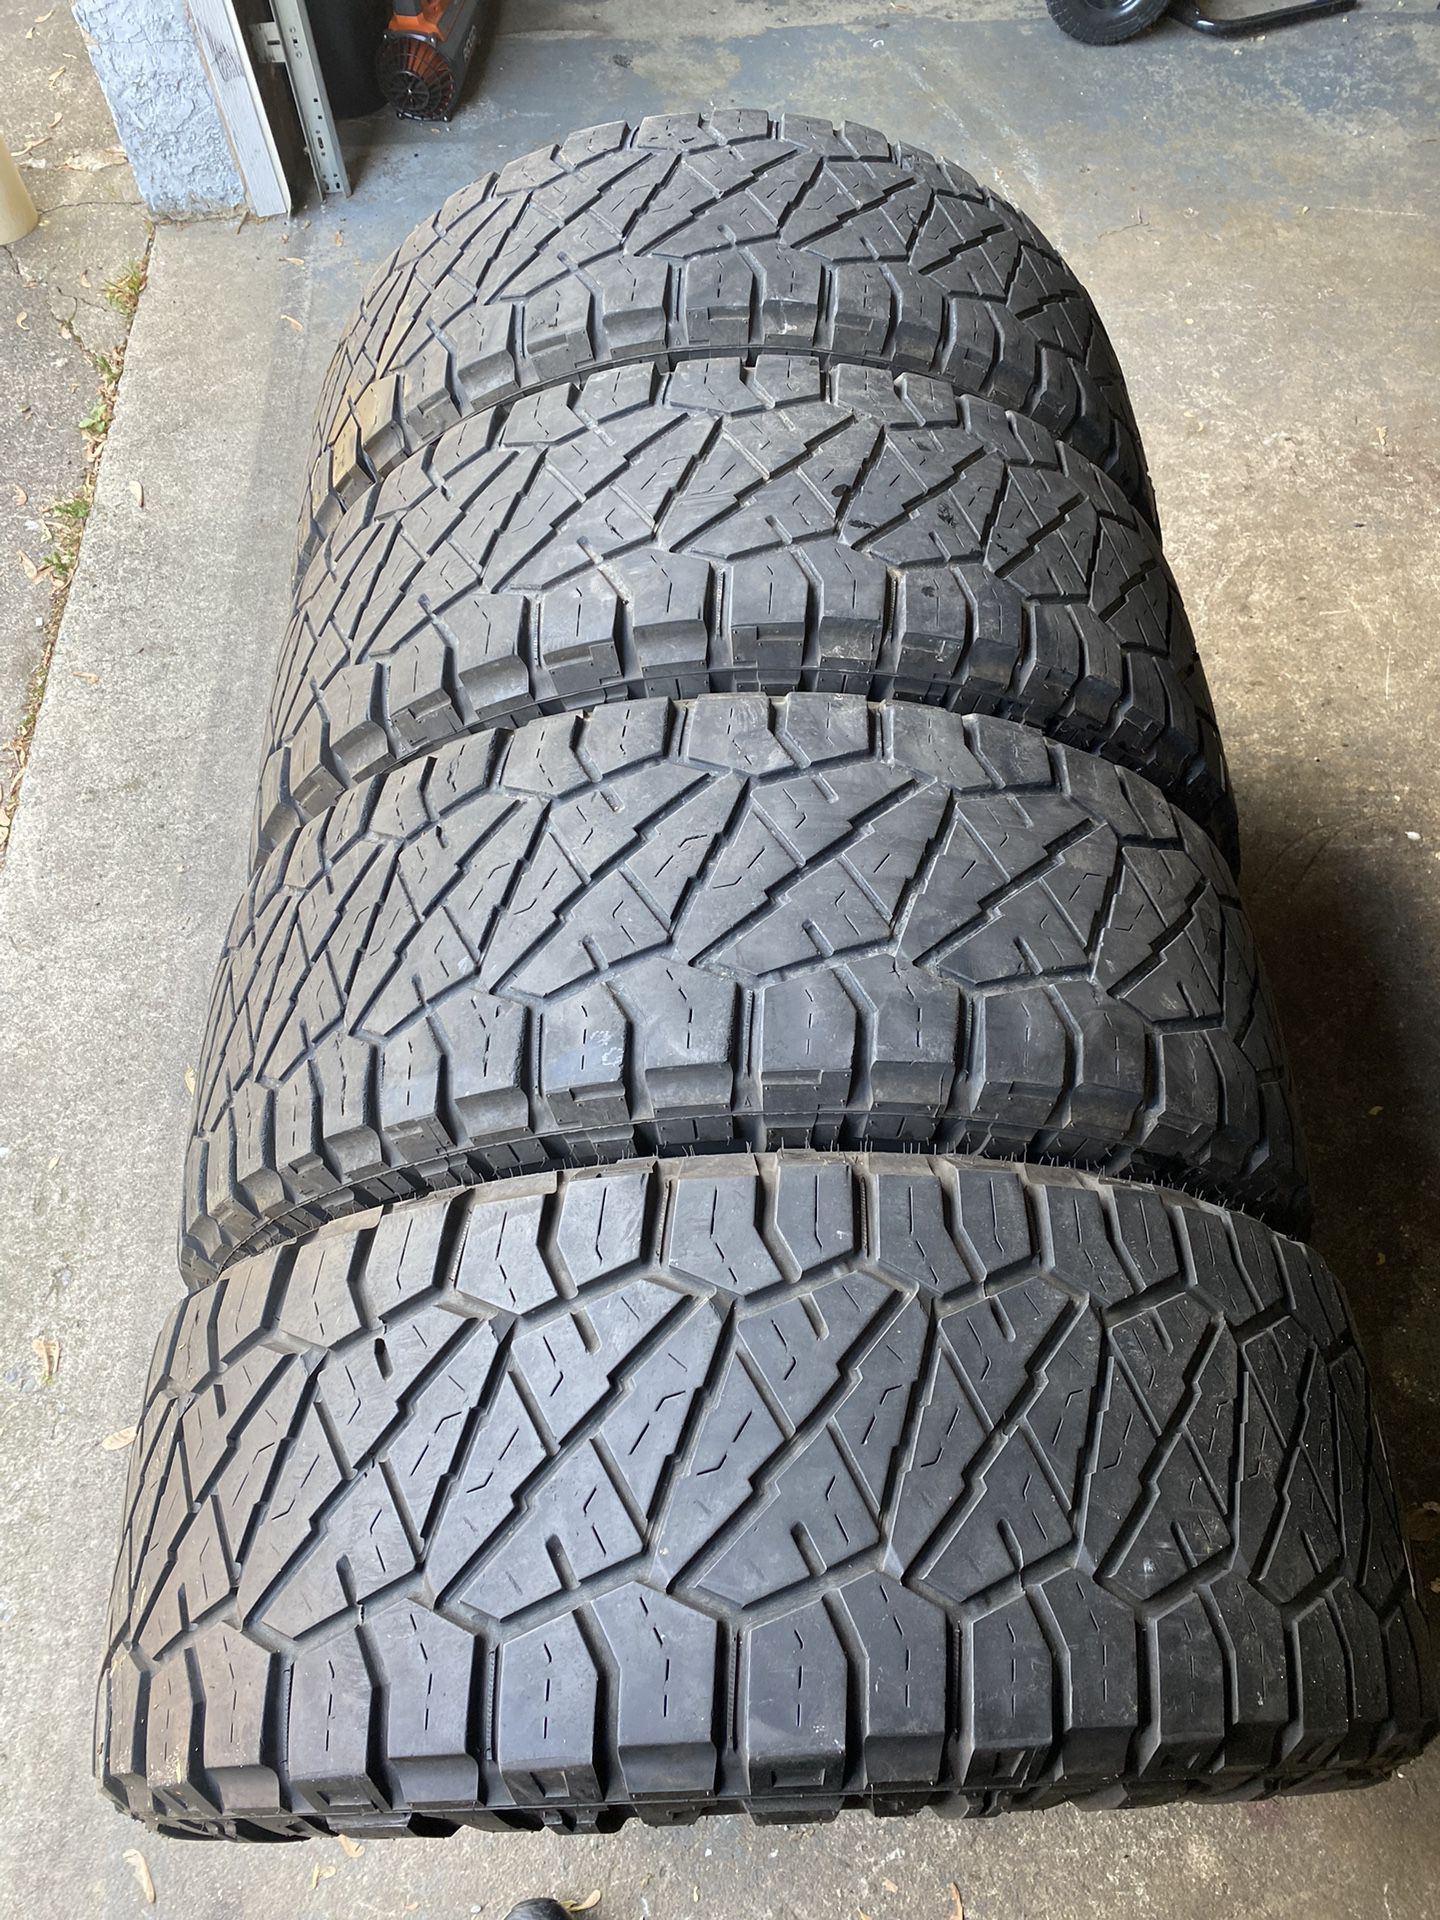 4) 35x12.50x20 Nitto Ridge Grappler Tires  Load Range F  DOT 4820  $495 for 4  I carry other sizes 